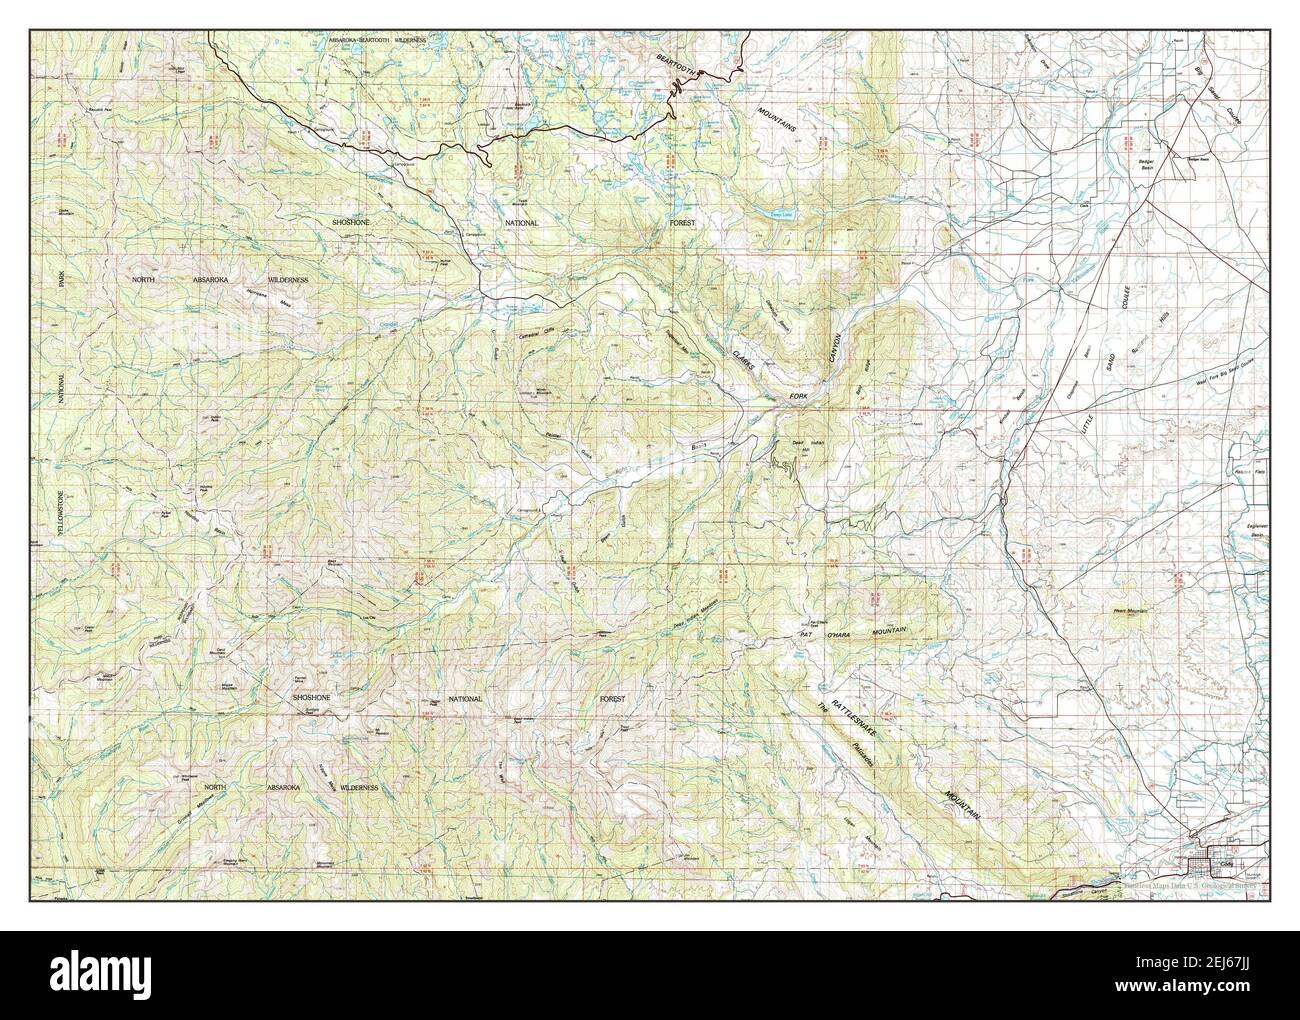 Cody, Wyoming, map 1980, 1:100000, United States of America by Timeless Maps, data U.S. Geological Survey Stock Photo